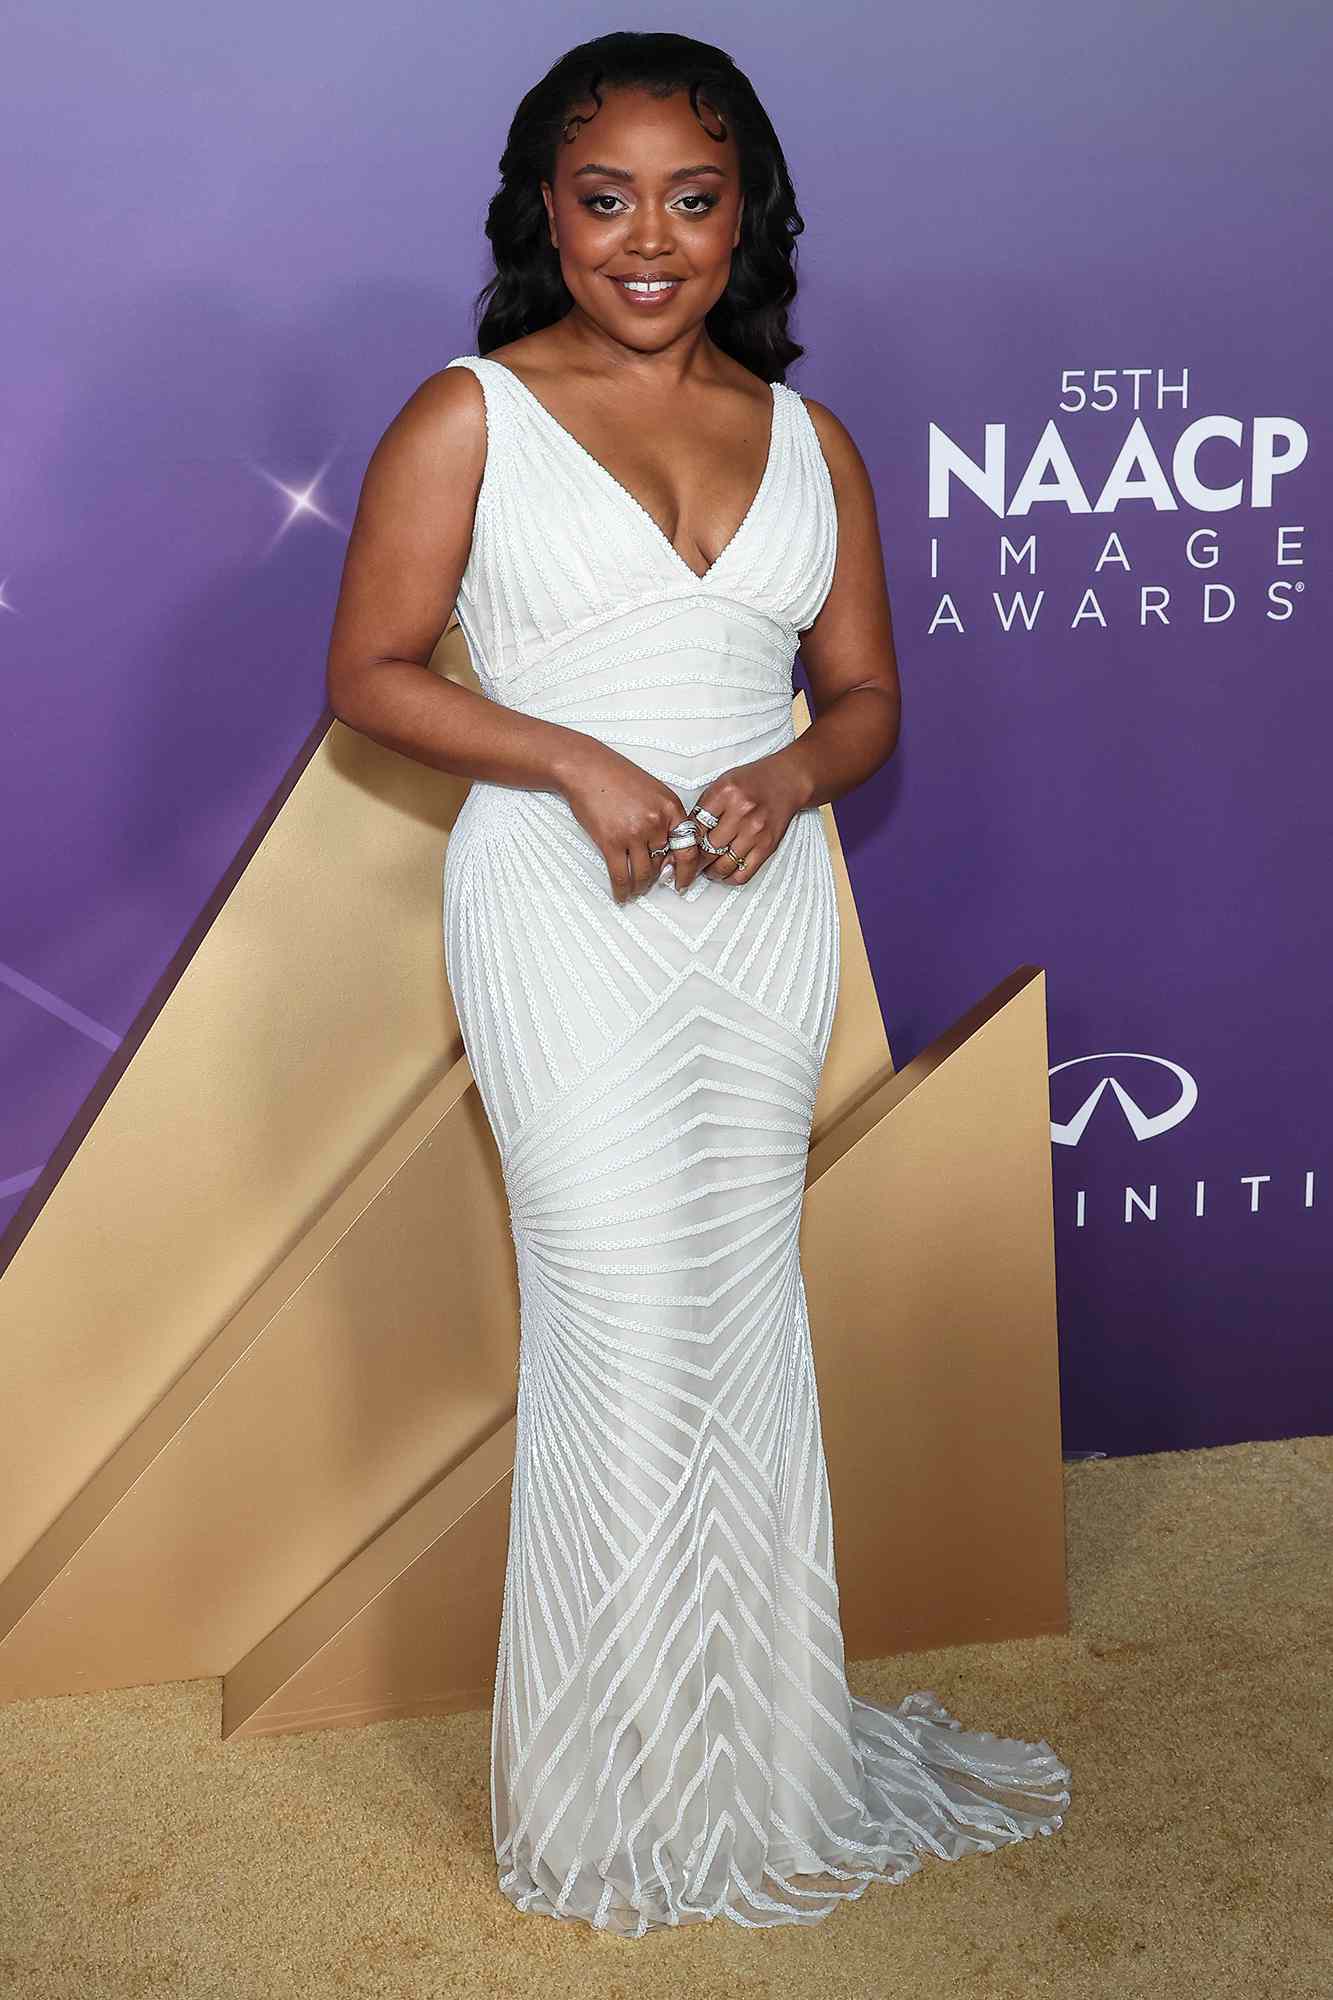 Quinta Brunson at the 55th NAACP Image Awards held at The Shrine Auditorium on March 16, 2024 in Los Angeles, California.